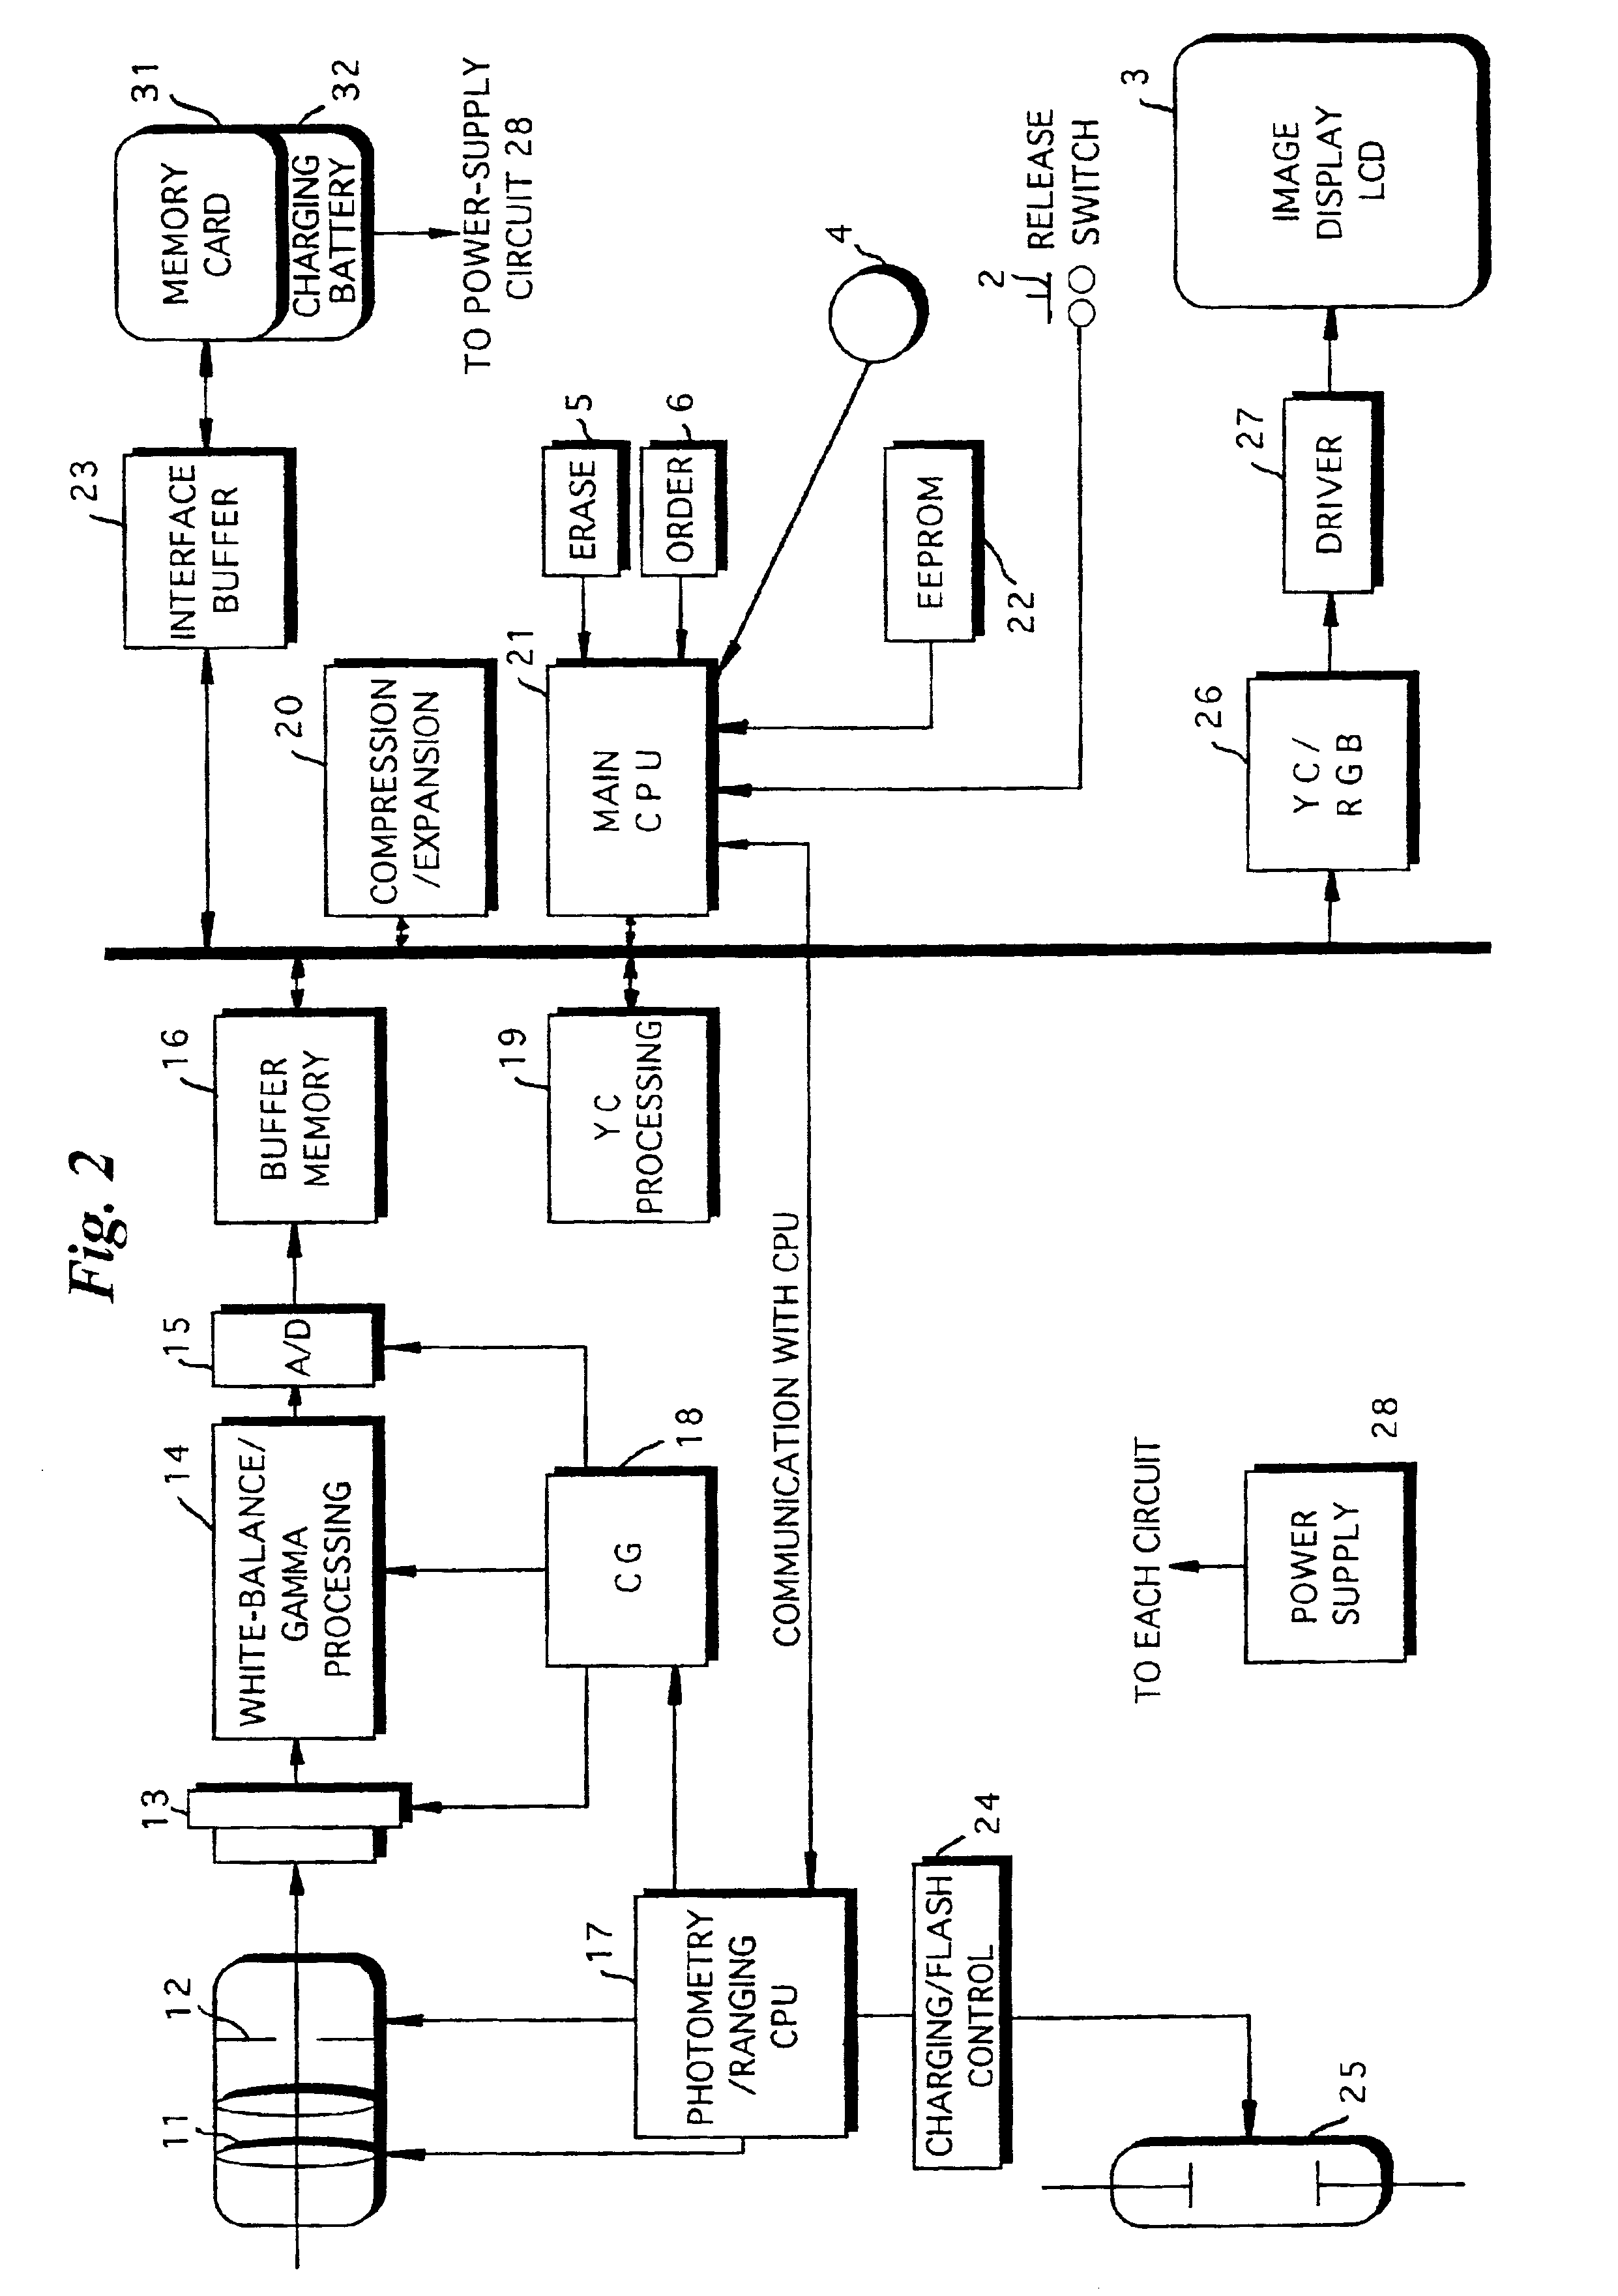 Digital camera having display controllers and designating unit and method of controlling operation